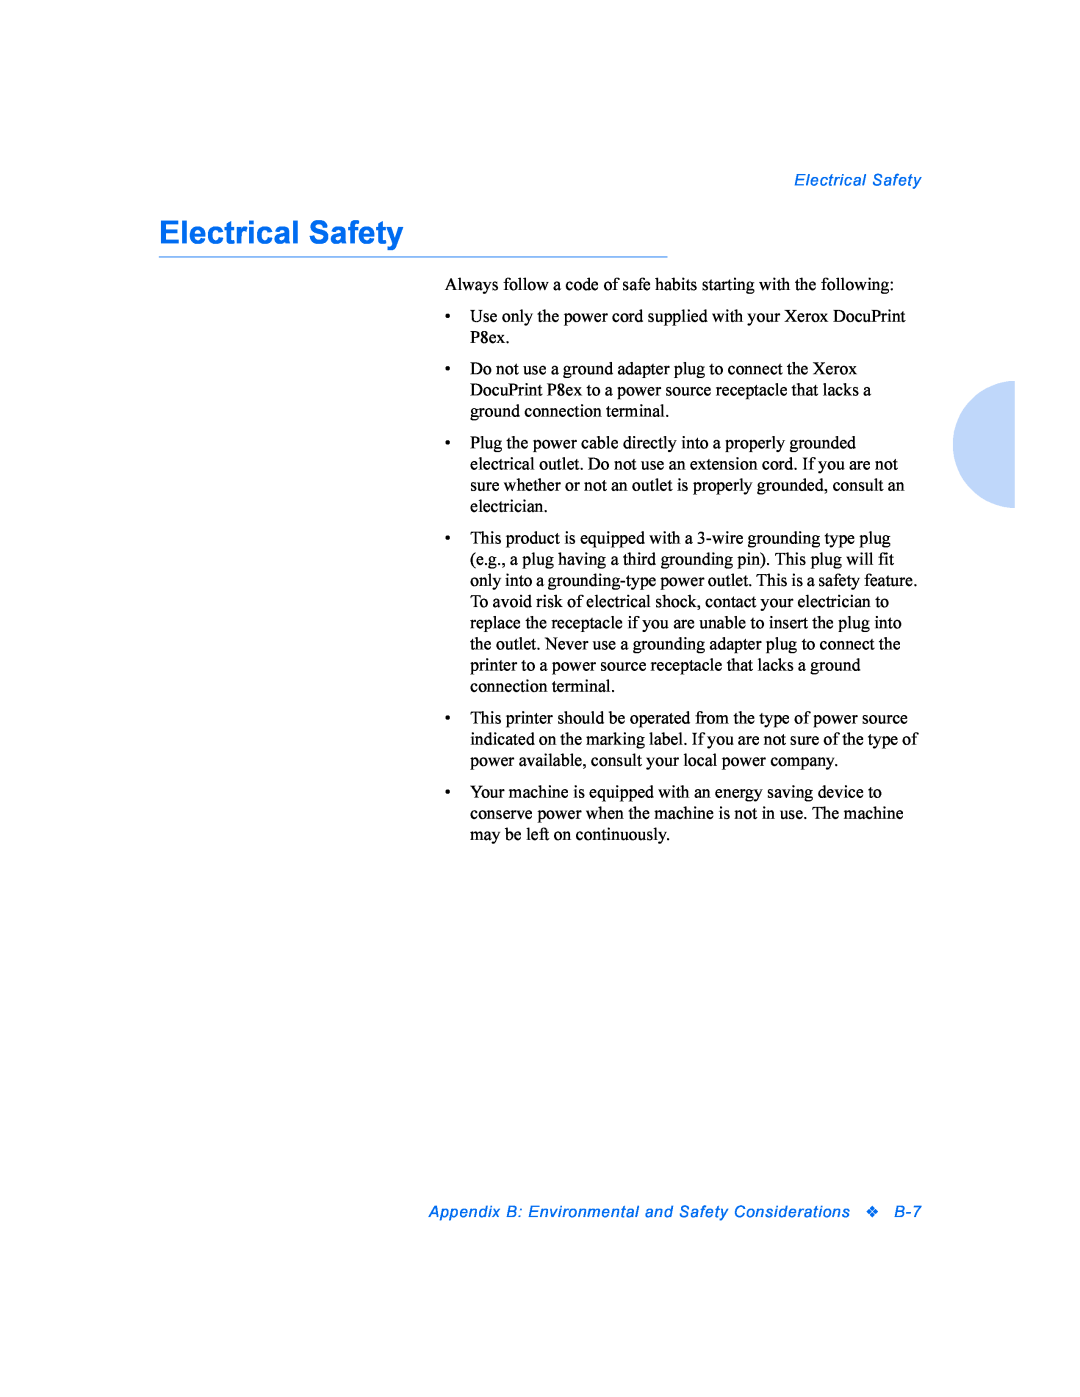 Xerox P8EX manual Electrical Safety 